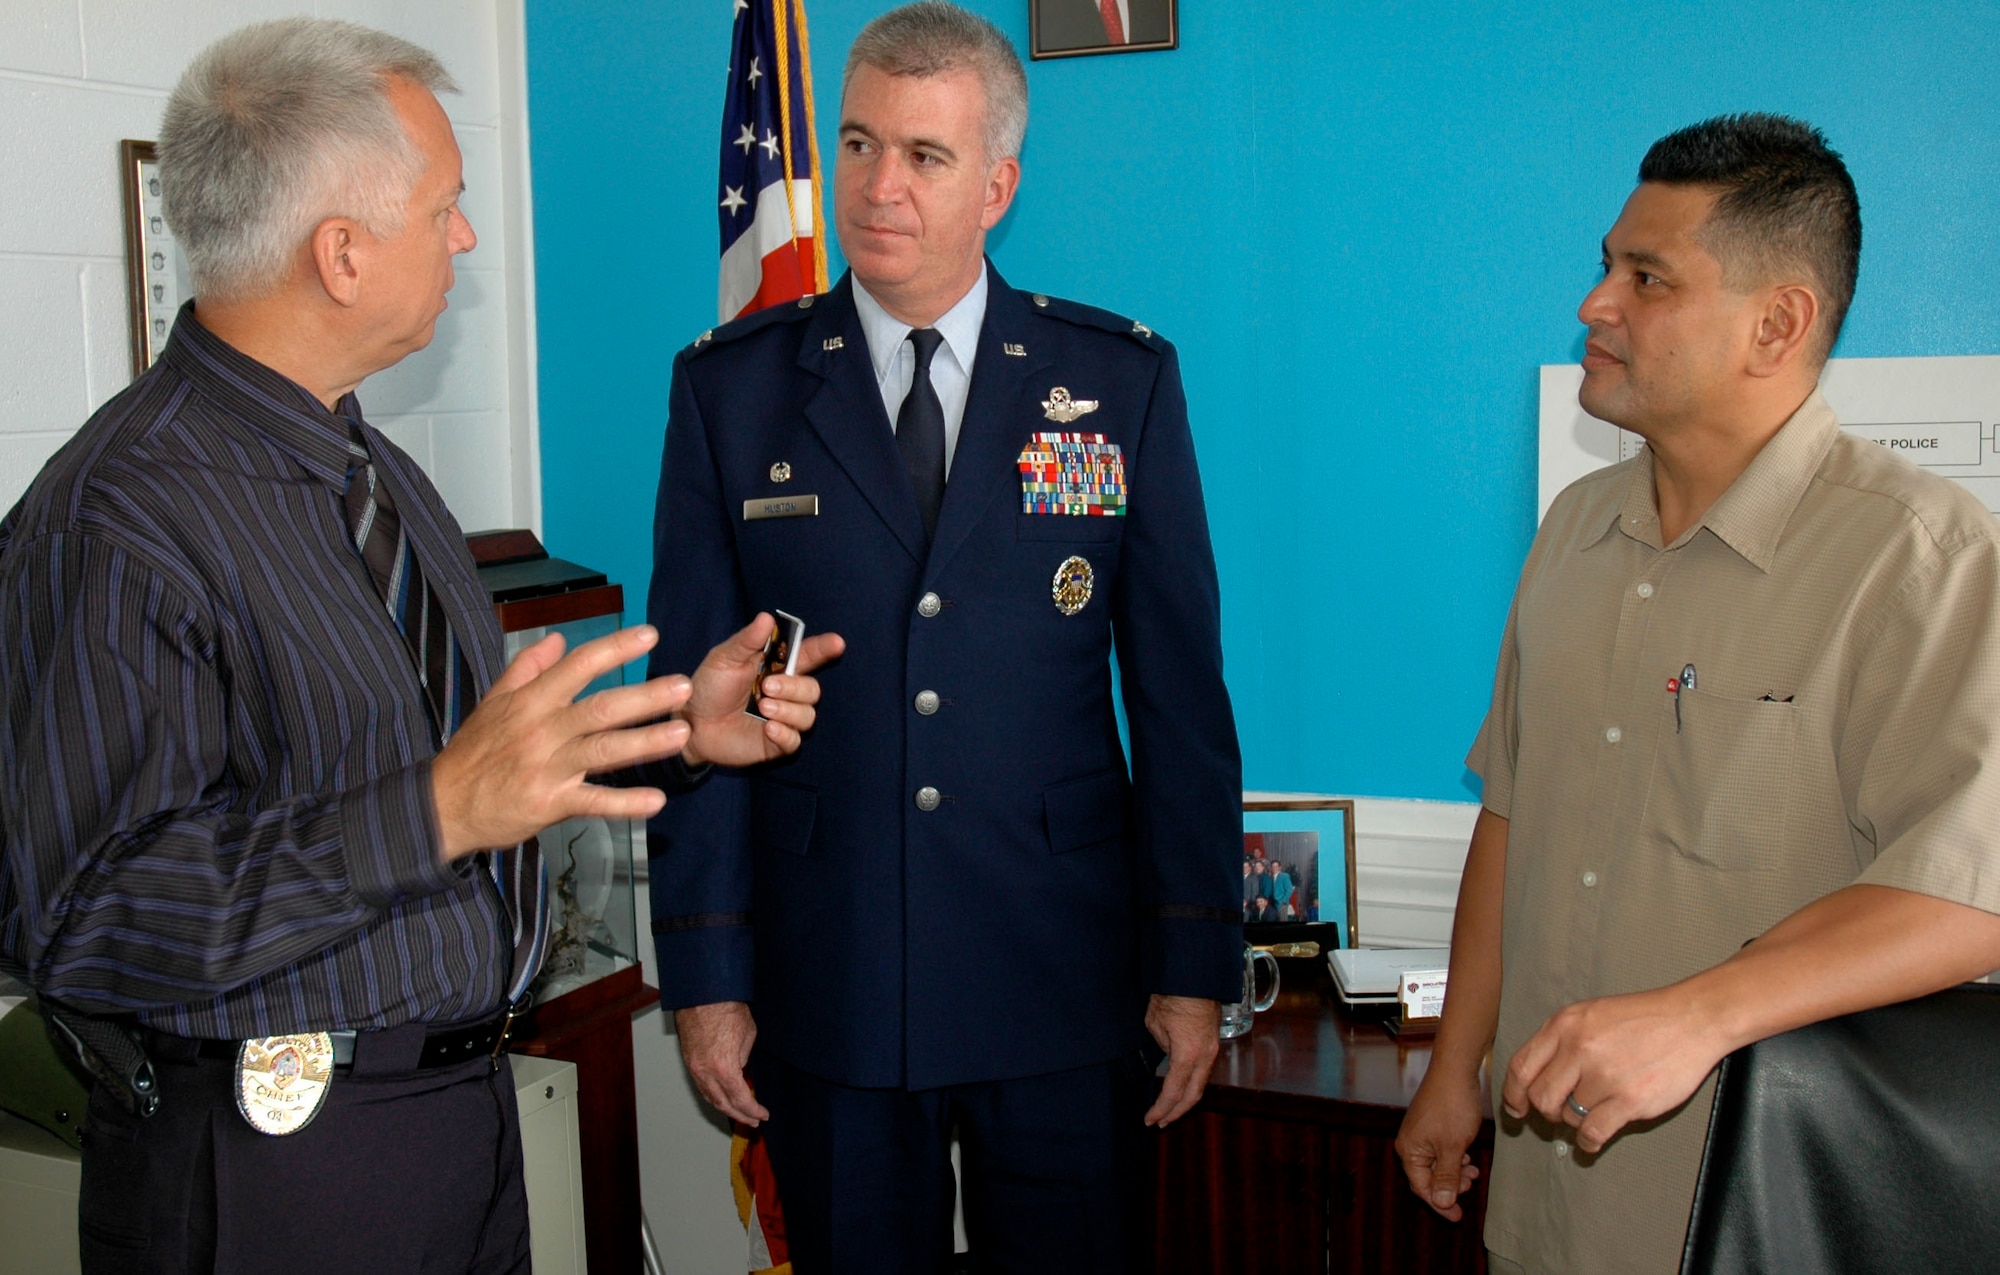 Guam Police Department Chief Paul Suba talks to Col. Robert “Randy” Huston, 624th Regional Support Group commander, about the advantages of having Air Force Reservists like Chief Master Sergeant Maurice Sayama (right) in his department.  Chief Sayama, an air freight superintendent for the Reserve, is currently a lieutenant with the police department where he has been working for 23 years.  At least a dozen other Guam Air Force Reservists are employed by the GPD.  (U.S. Air Force photo/Capt. Christy Stravolo) 